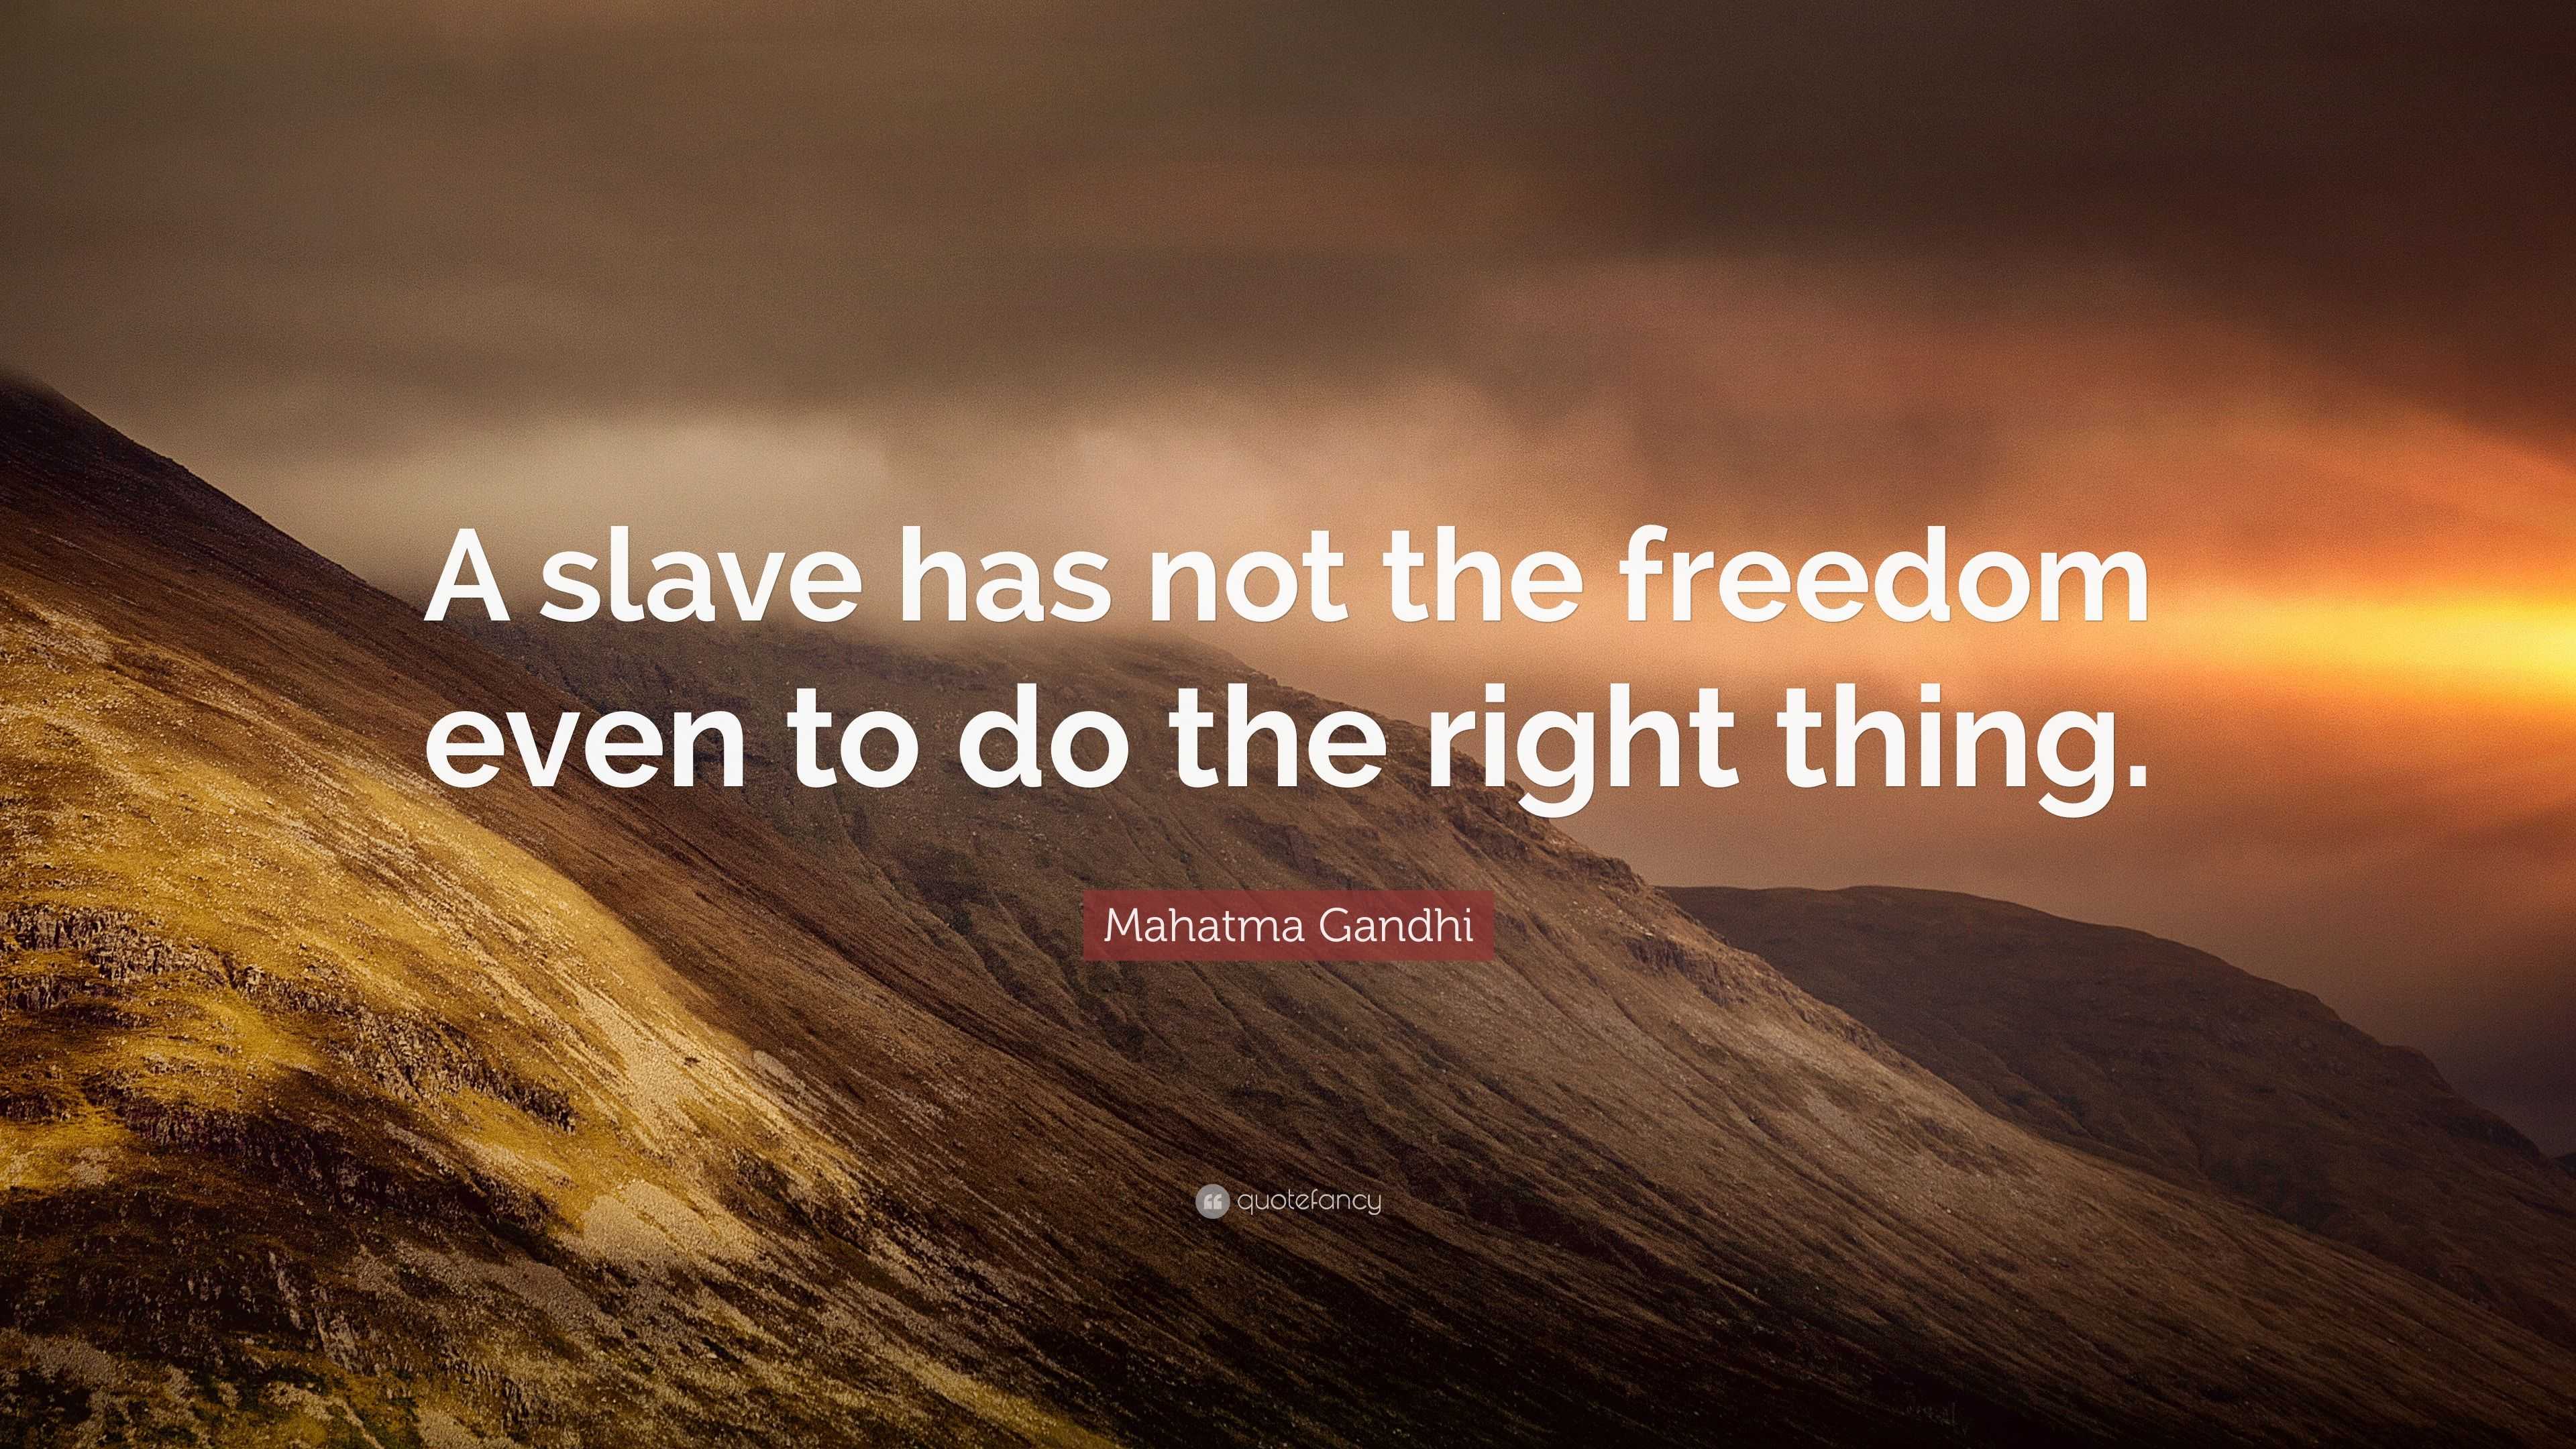 Mahatma Gandhi Quote: “A slave has not the freedom even to do the right ...